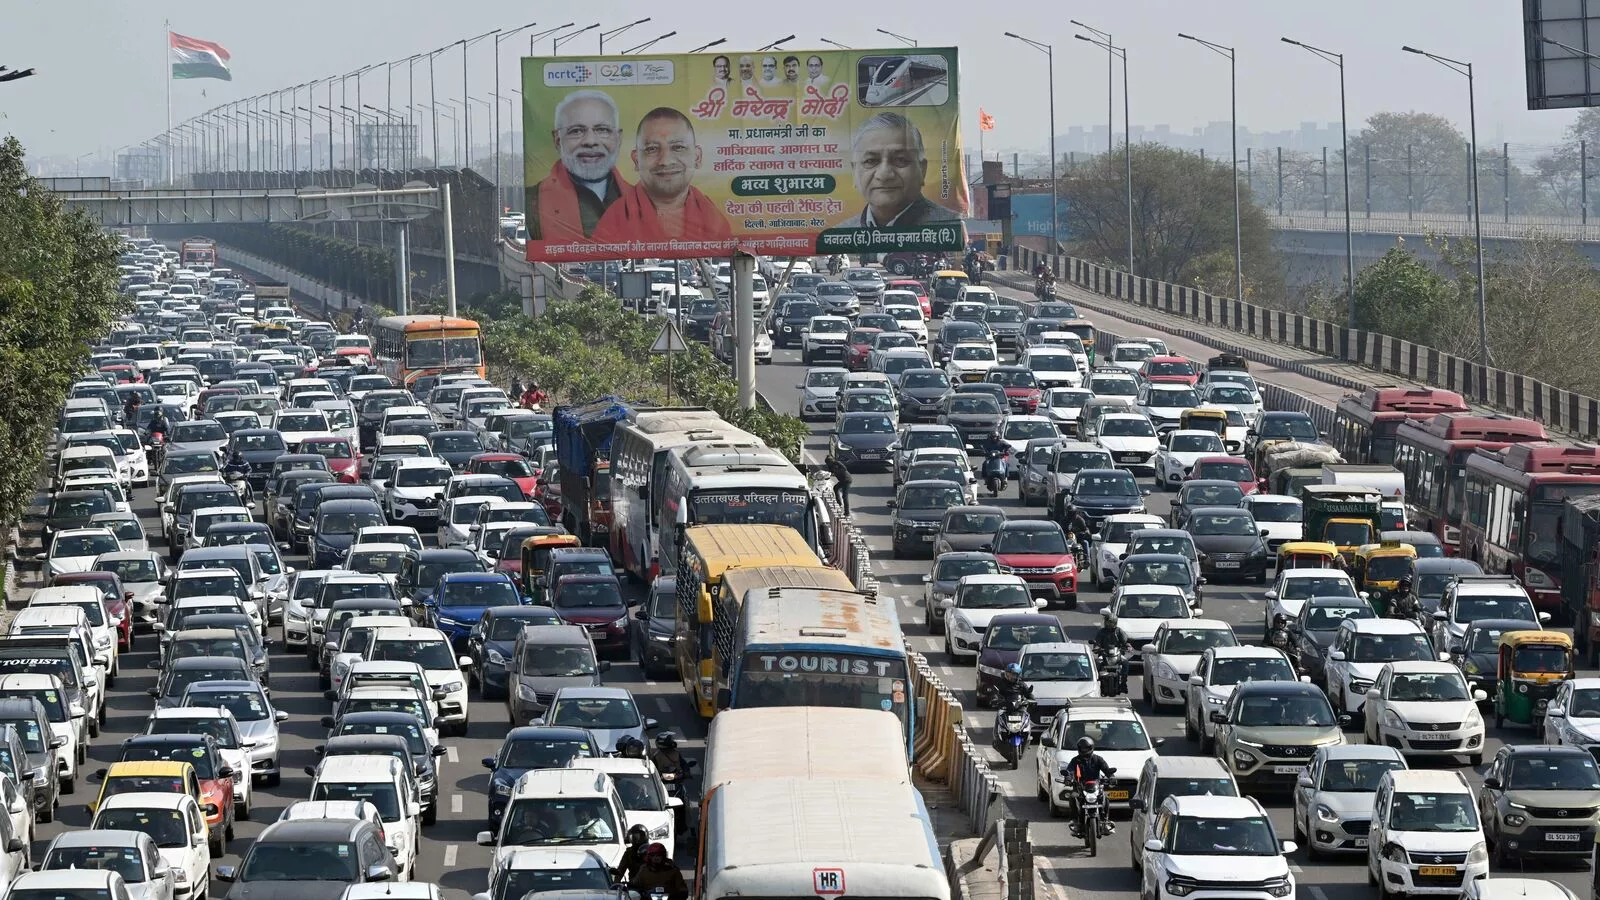 Traffic snarls expected in key areas of Delhi today. Here are routes to avoid